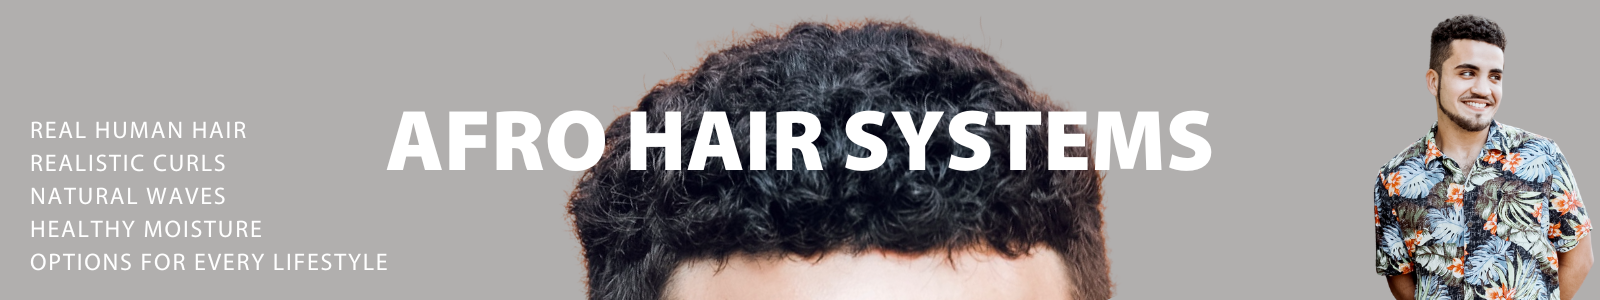 MEN'S AFRO HAIR SYSTEMS